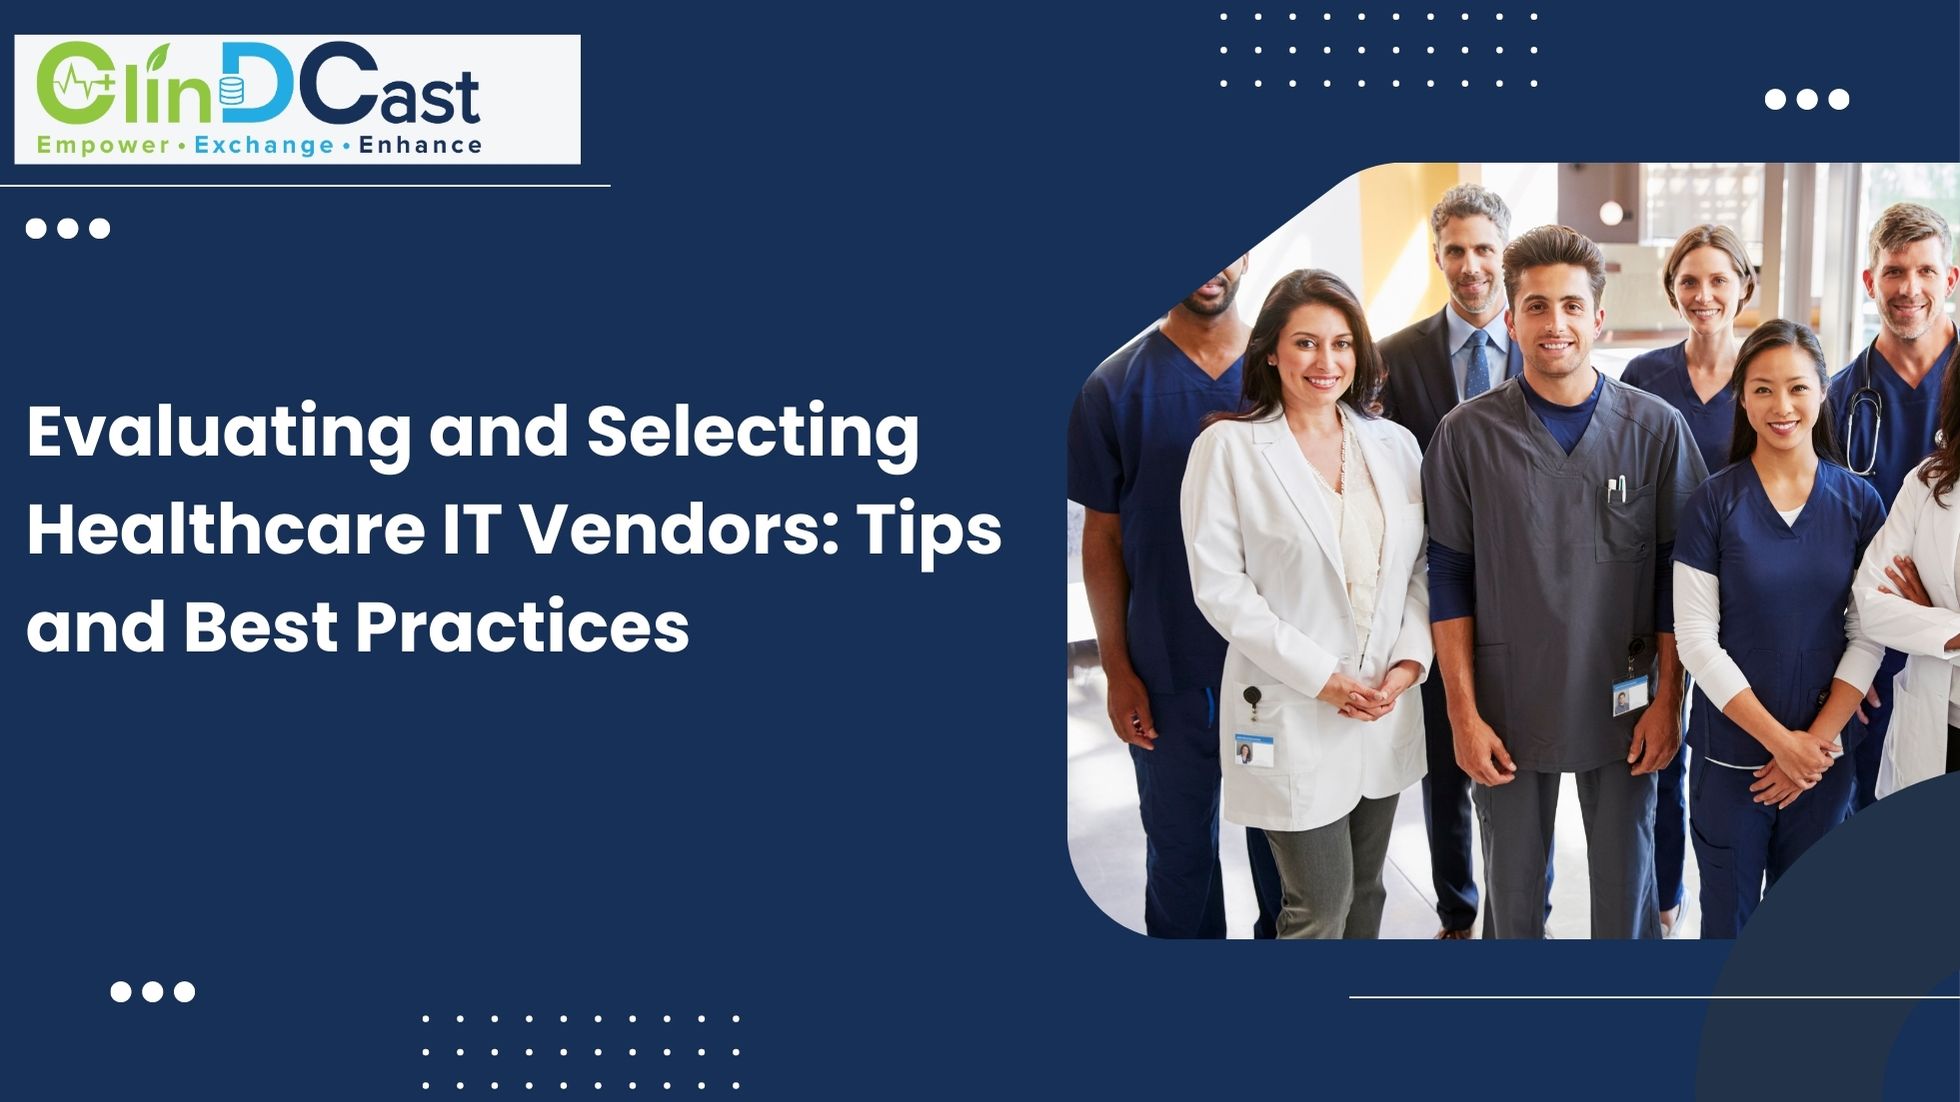 Evaluating and Selecting Healthcare IT Vendors: Tips and Best Practices